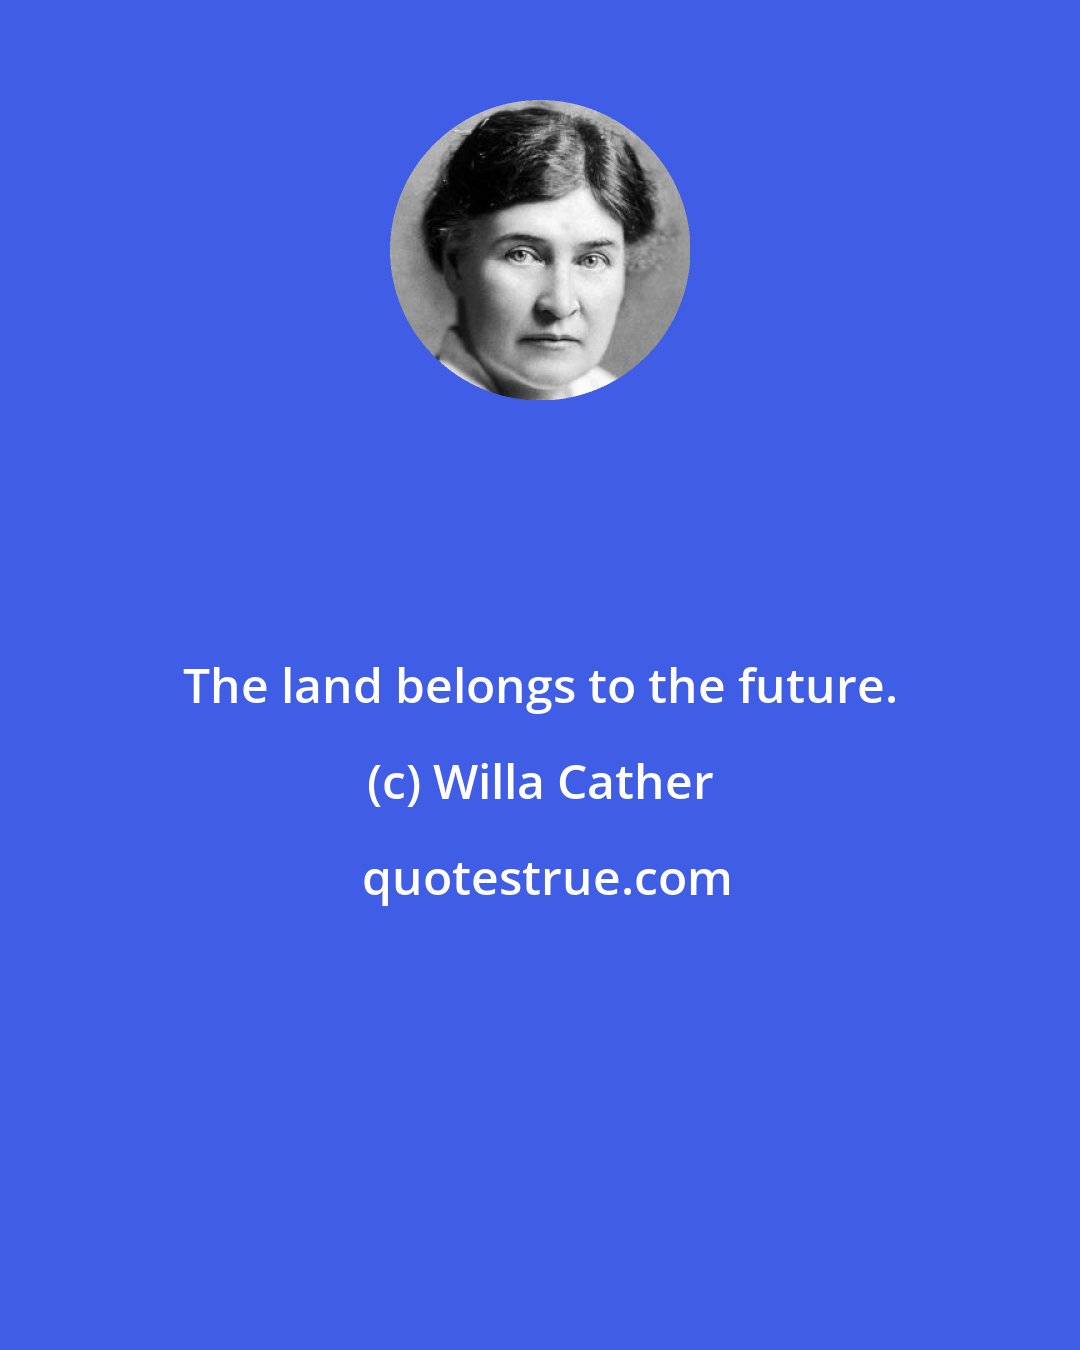 Willa Cather: The land belongs to the future.